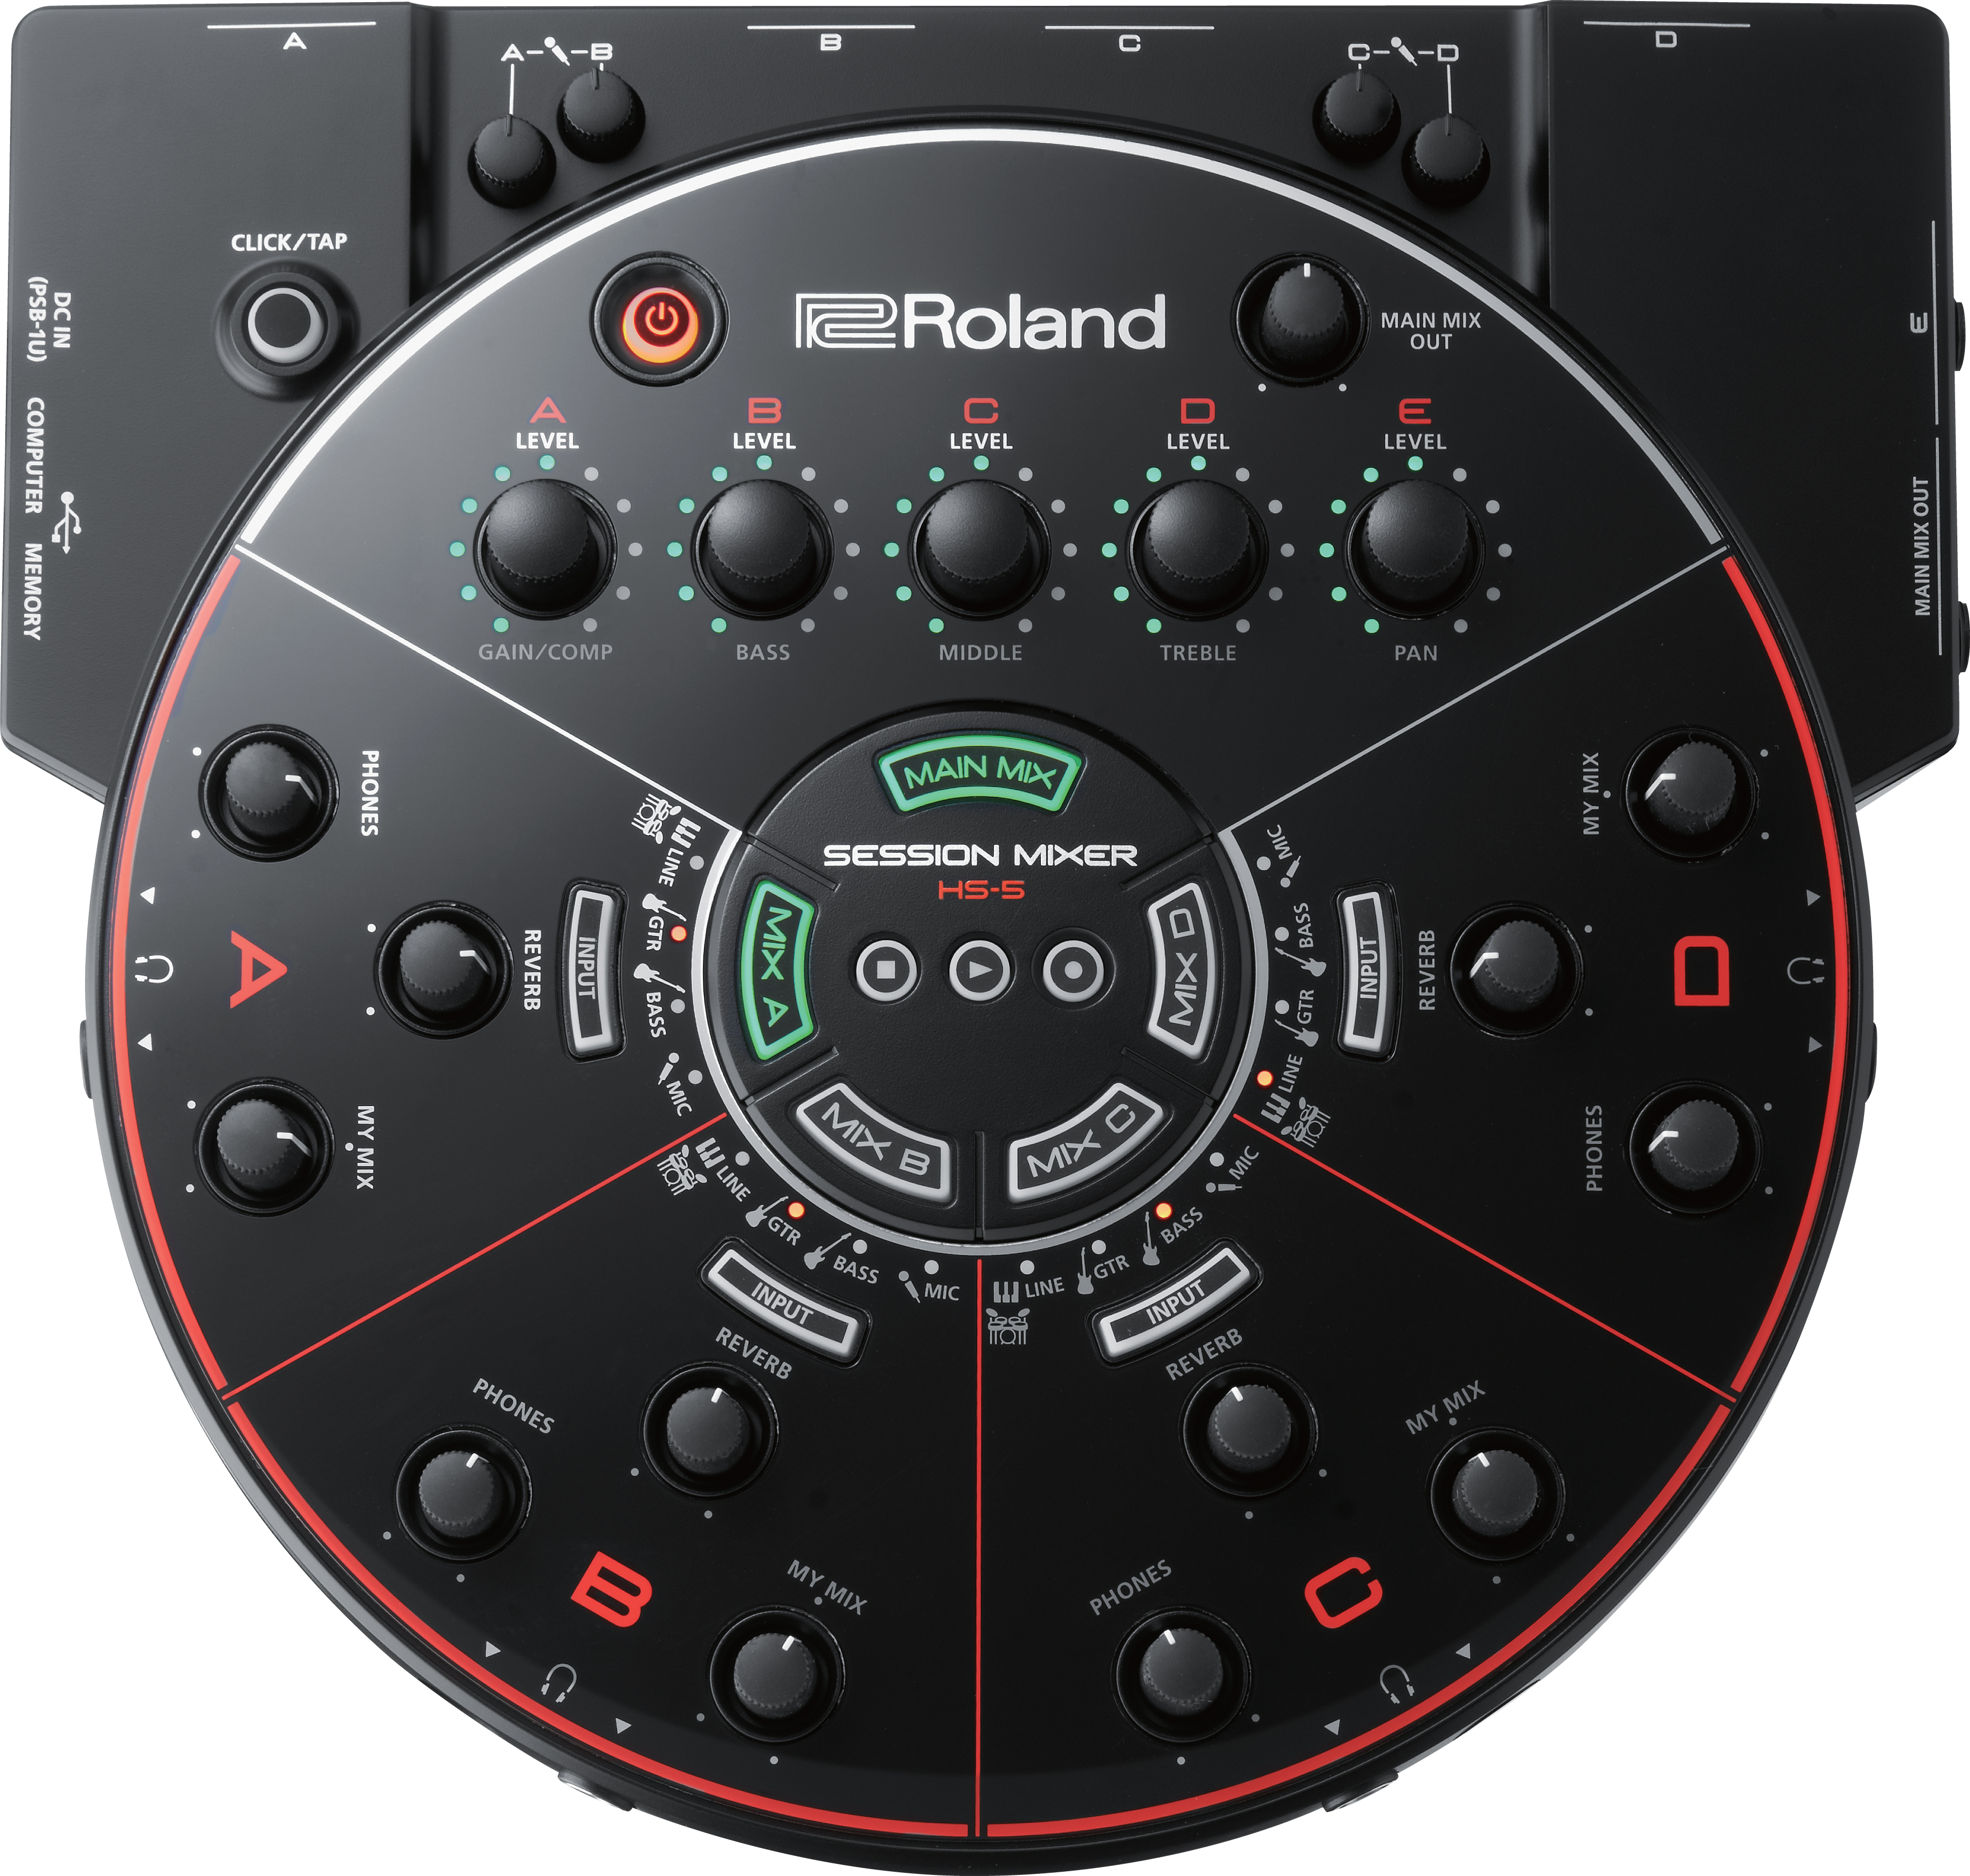 Roland Hs 5 Session Mixer - Monitor controller - Main picture